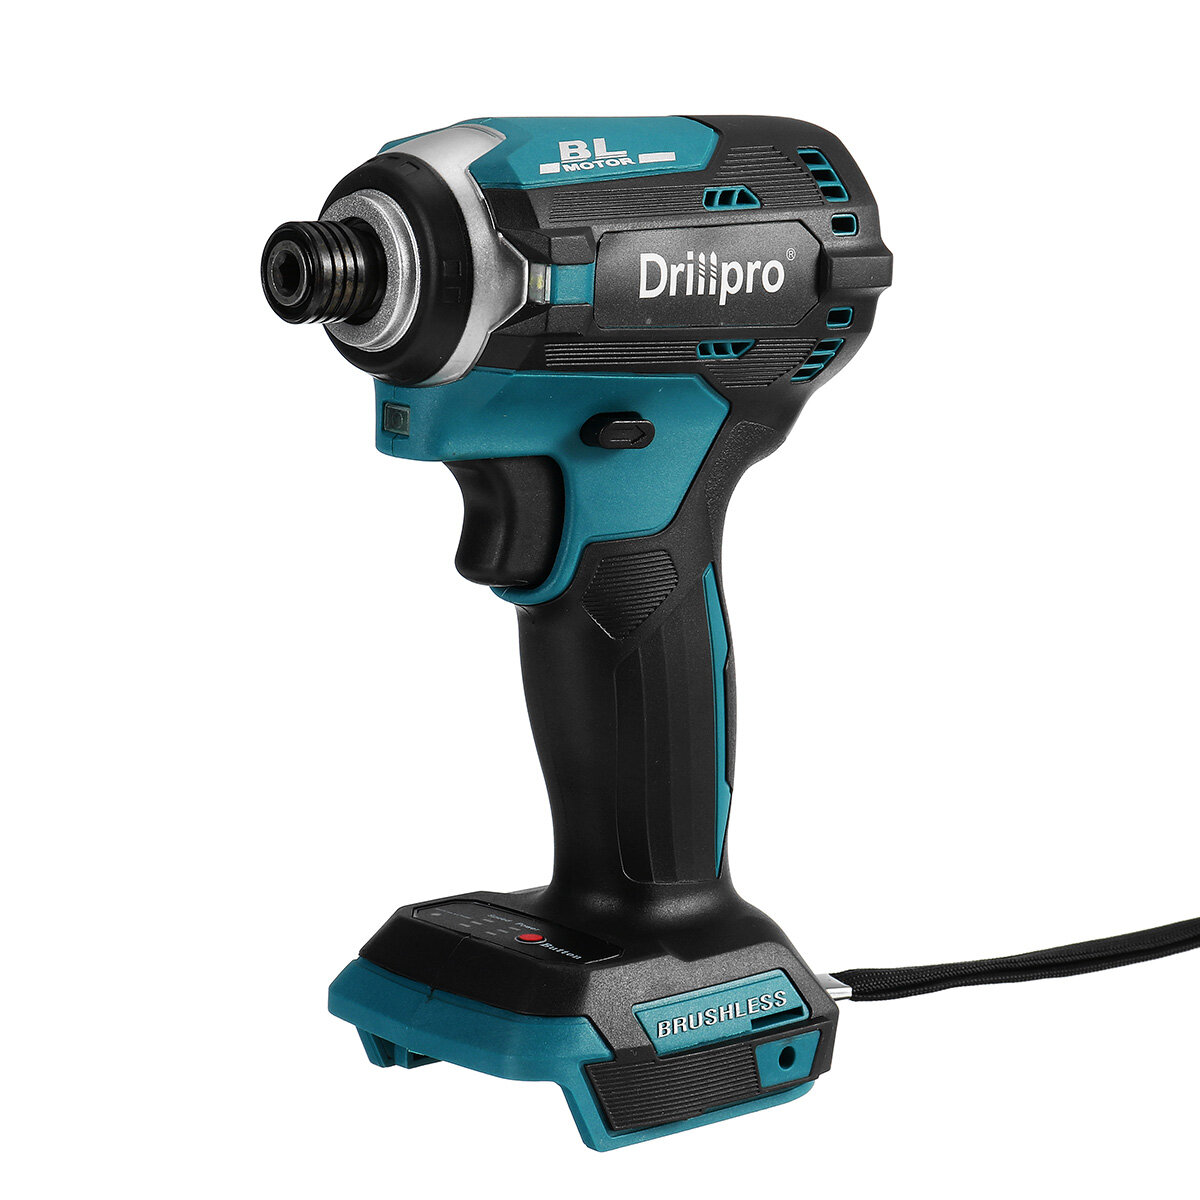 best price,drillpro,light,cordless,electric,screwdriver,for,makita,18v,discount